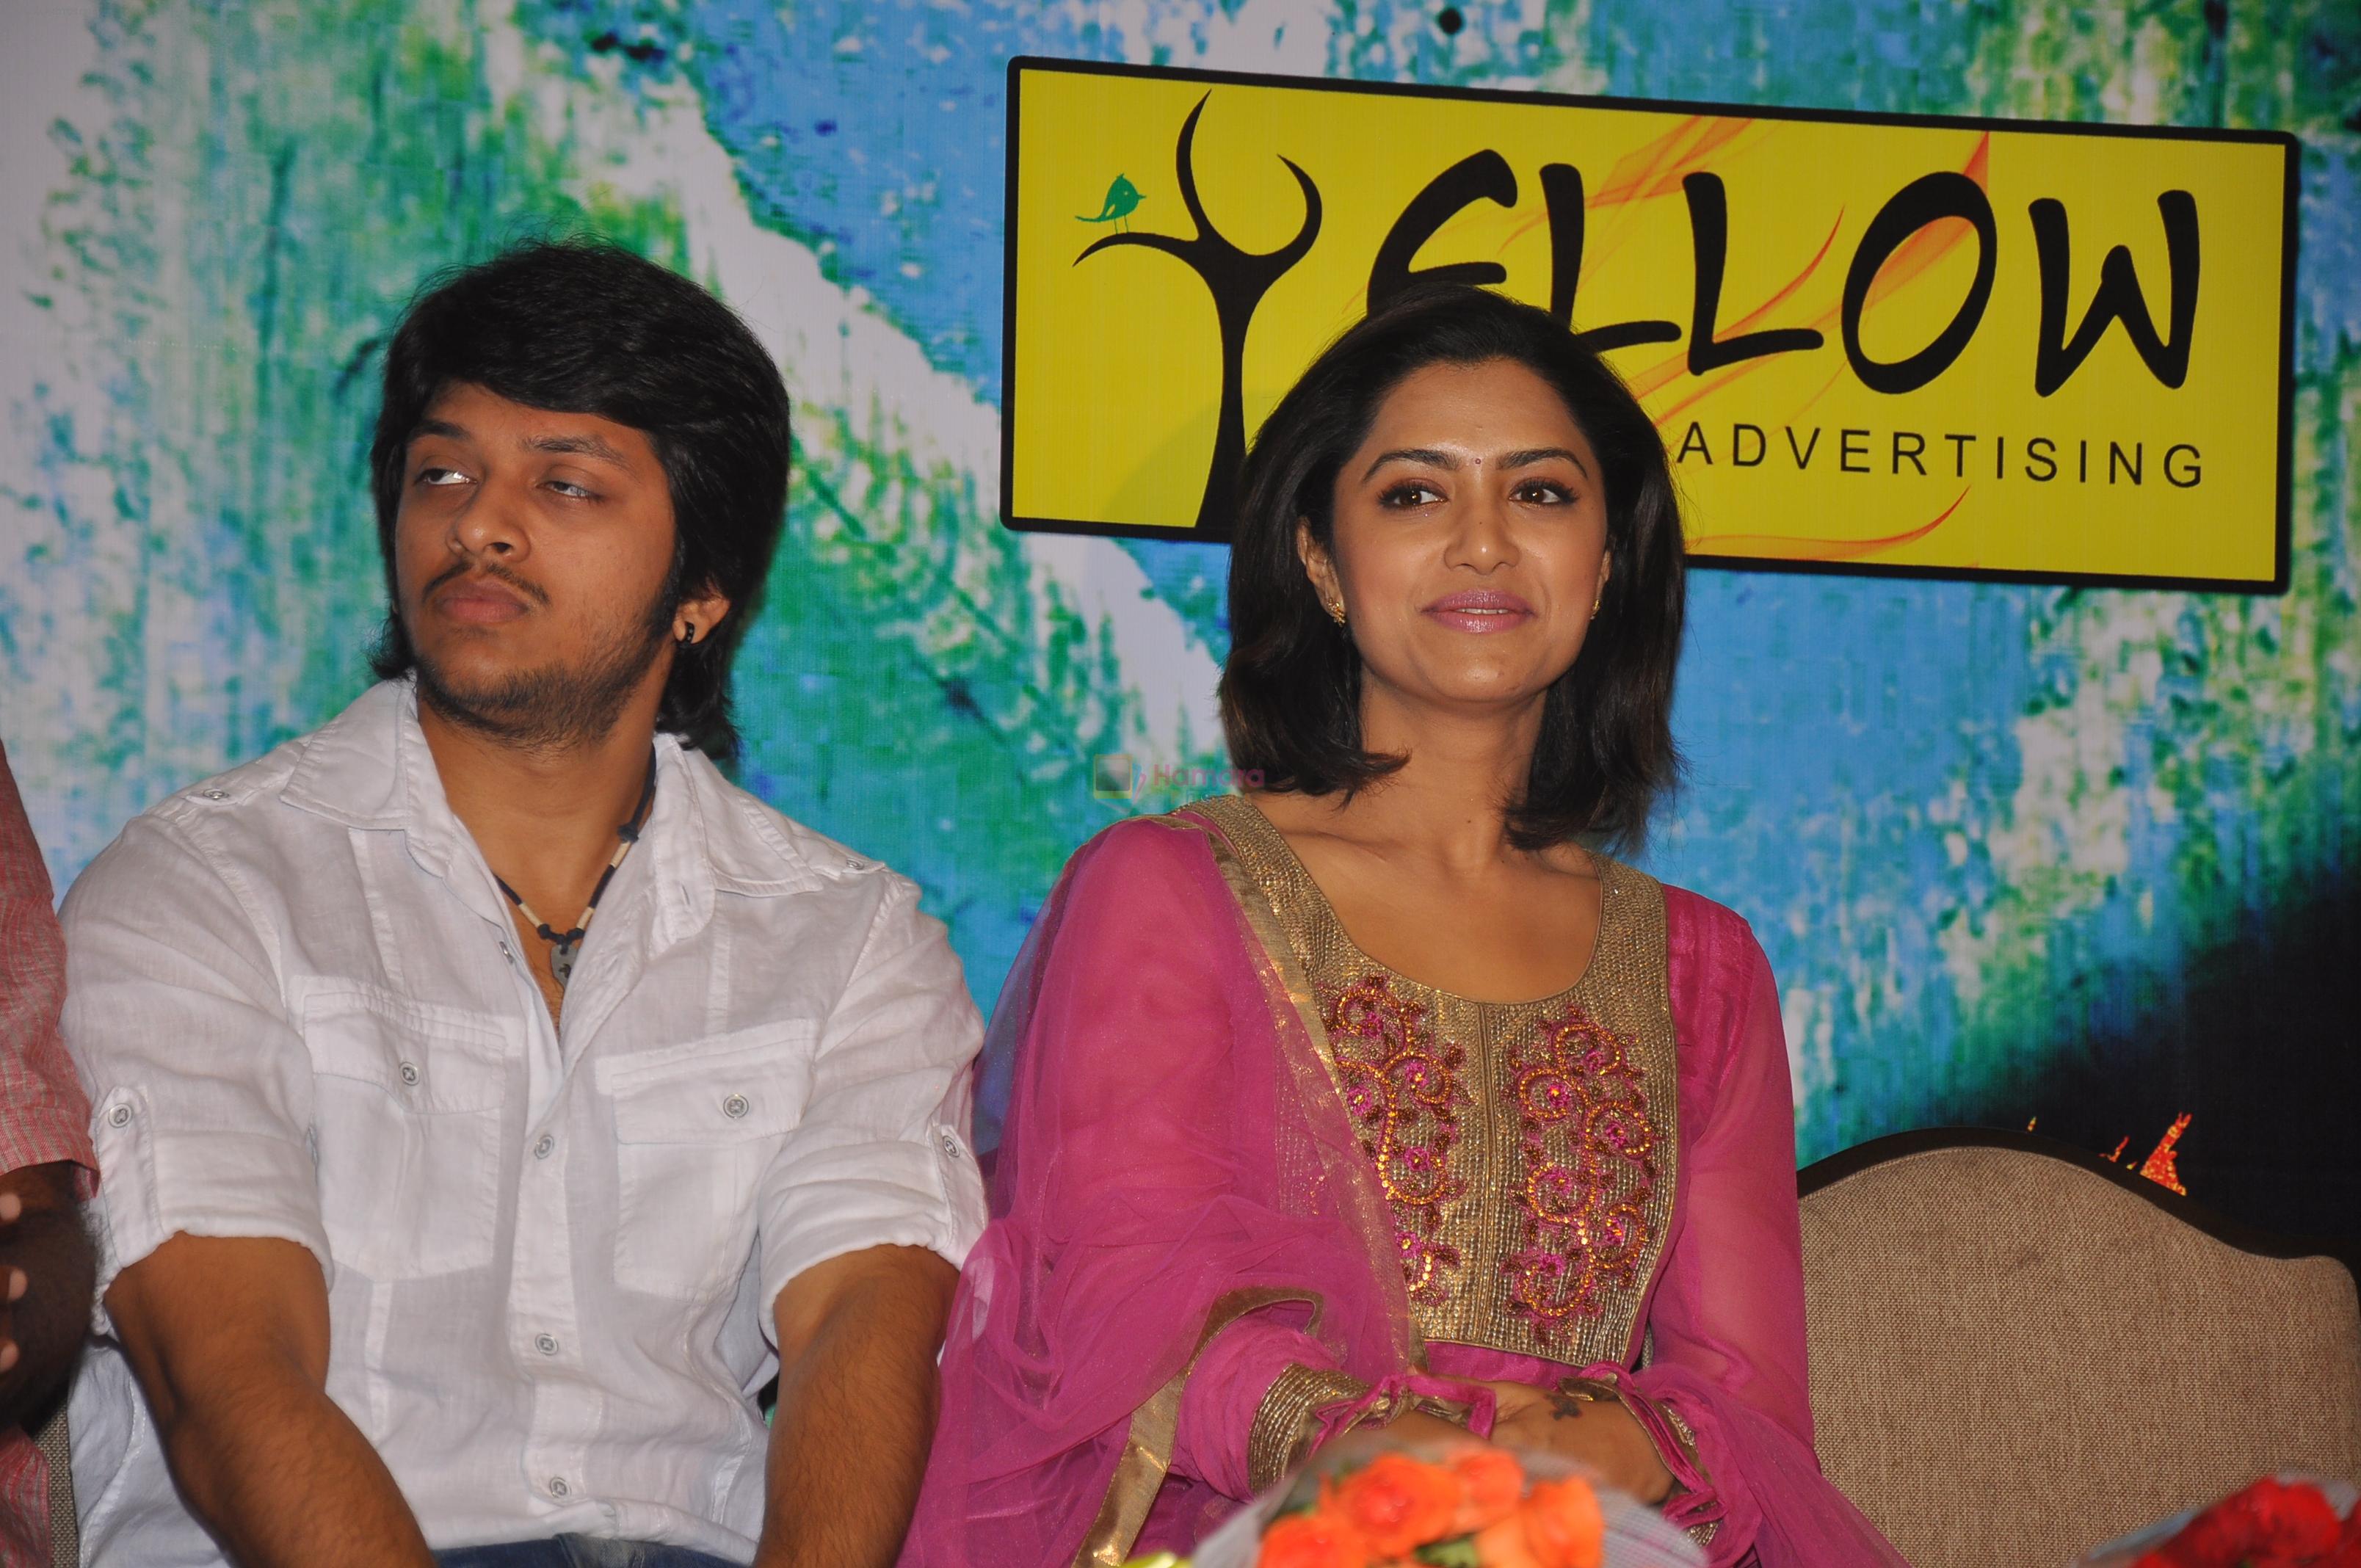 Mamta Mohandas attends Anwar Movie Audio Launch on 5th October 2011